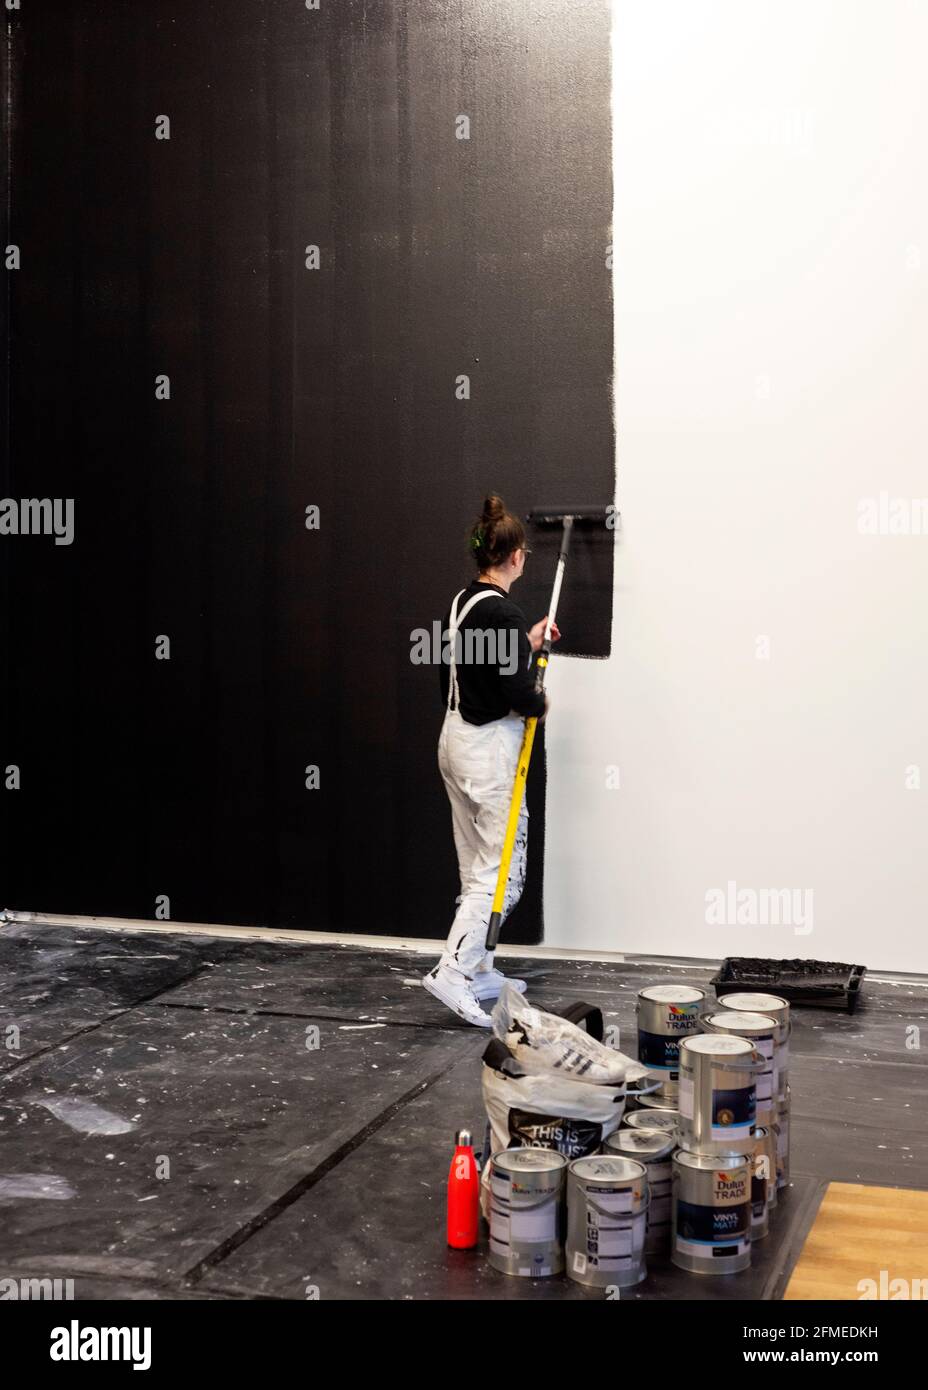 Young woman artist worker painting walls in black and white as part of performance art work installation called A Life ( Black and White) by Bulgarian artist Nedko Solakov in Tate Modern, London, United Kingdom as of February 2020. Stock Photo